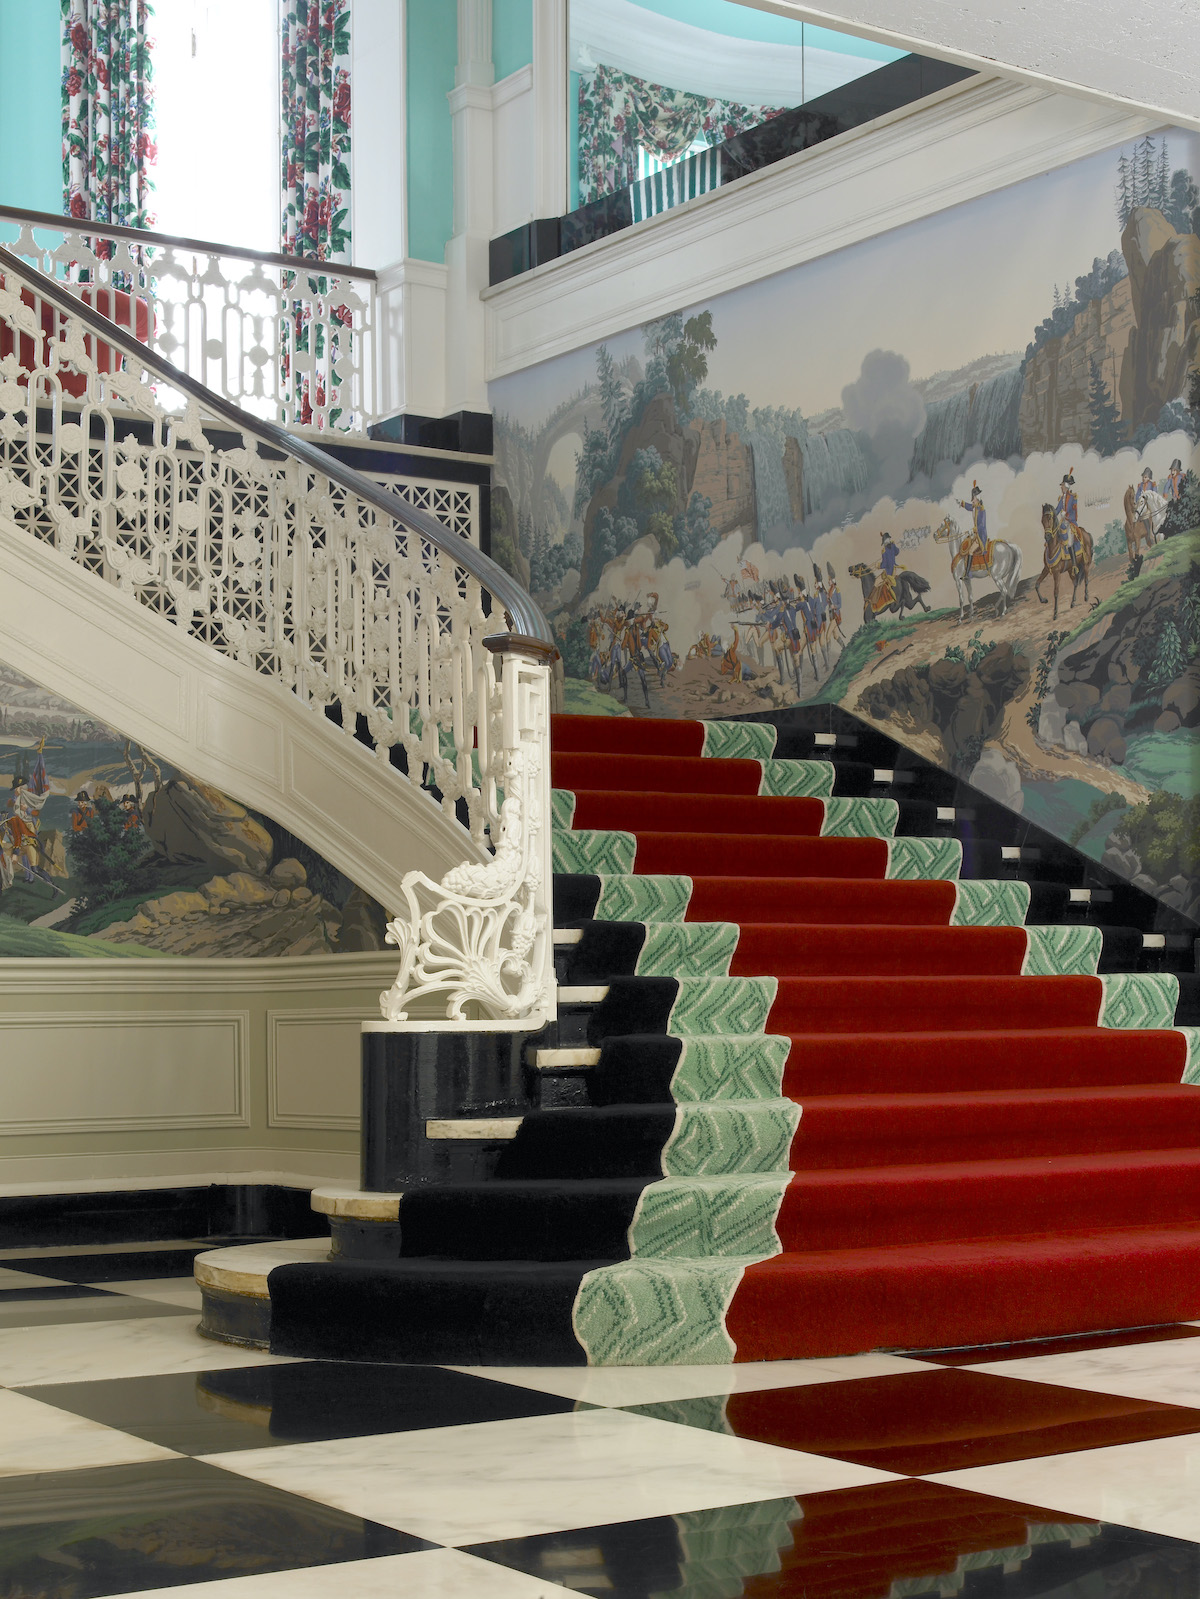 Red velvet carpet covers a staircase.